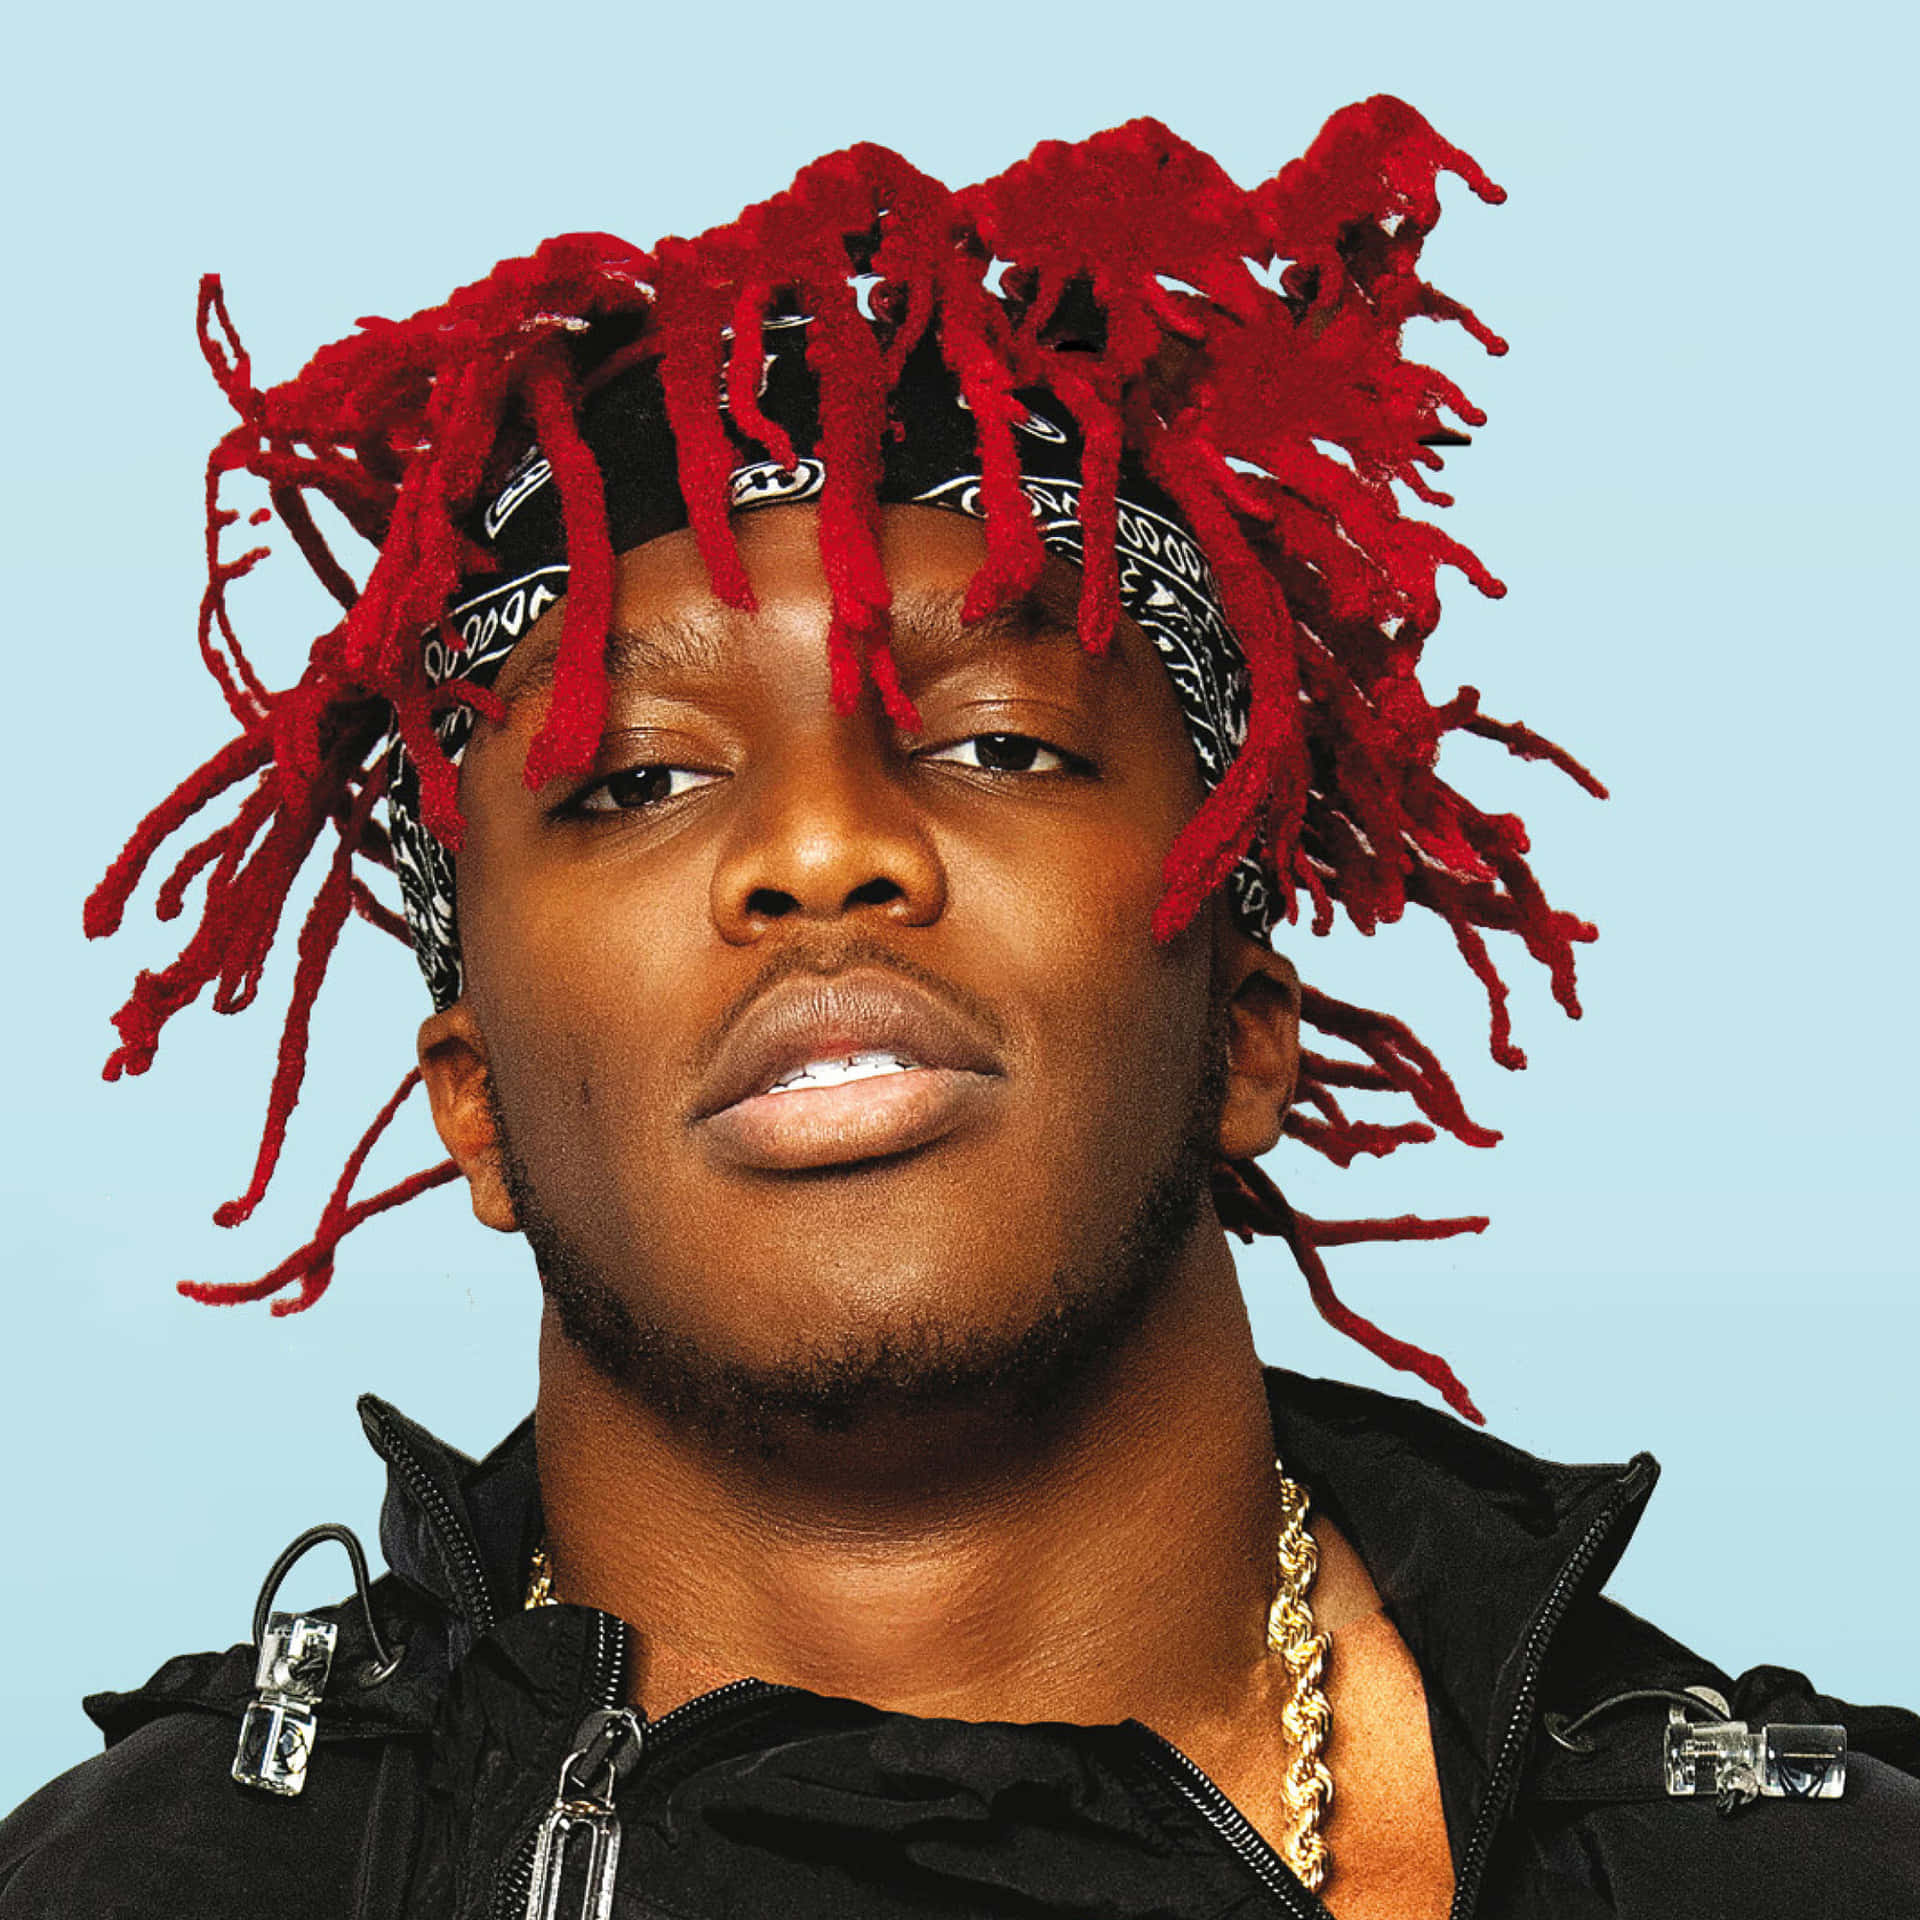 A Man With Red Dreadlocks And A Black Jacket Wallpaper